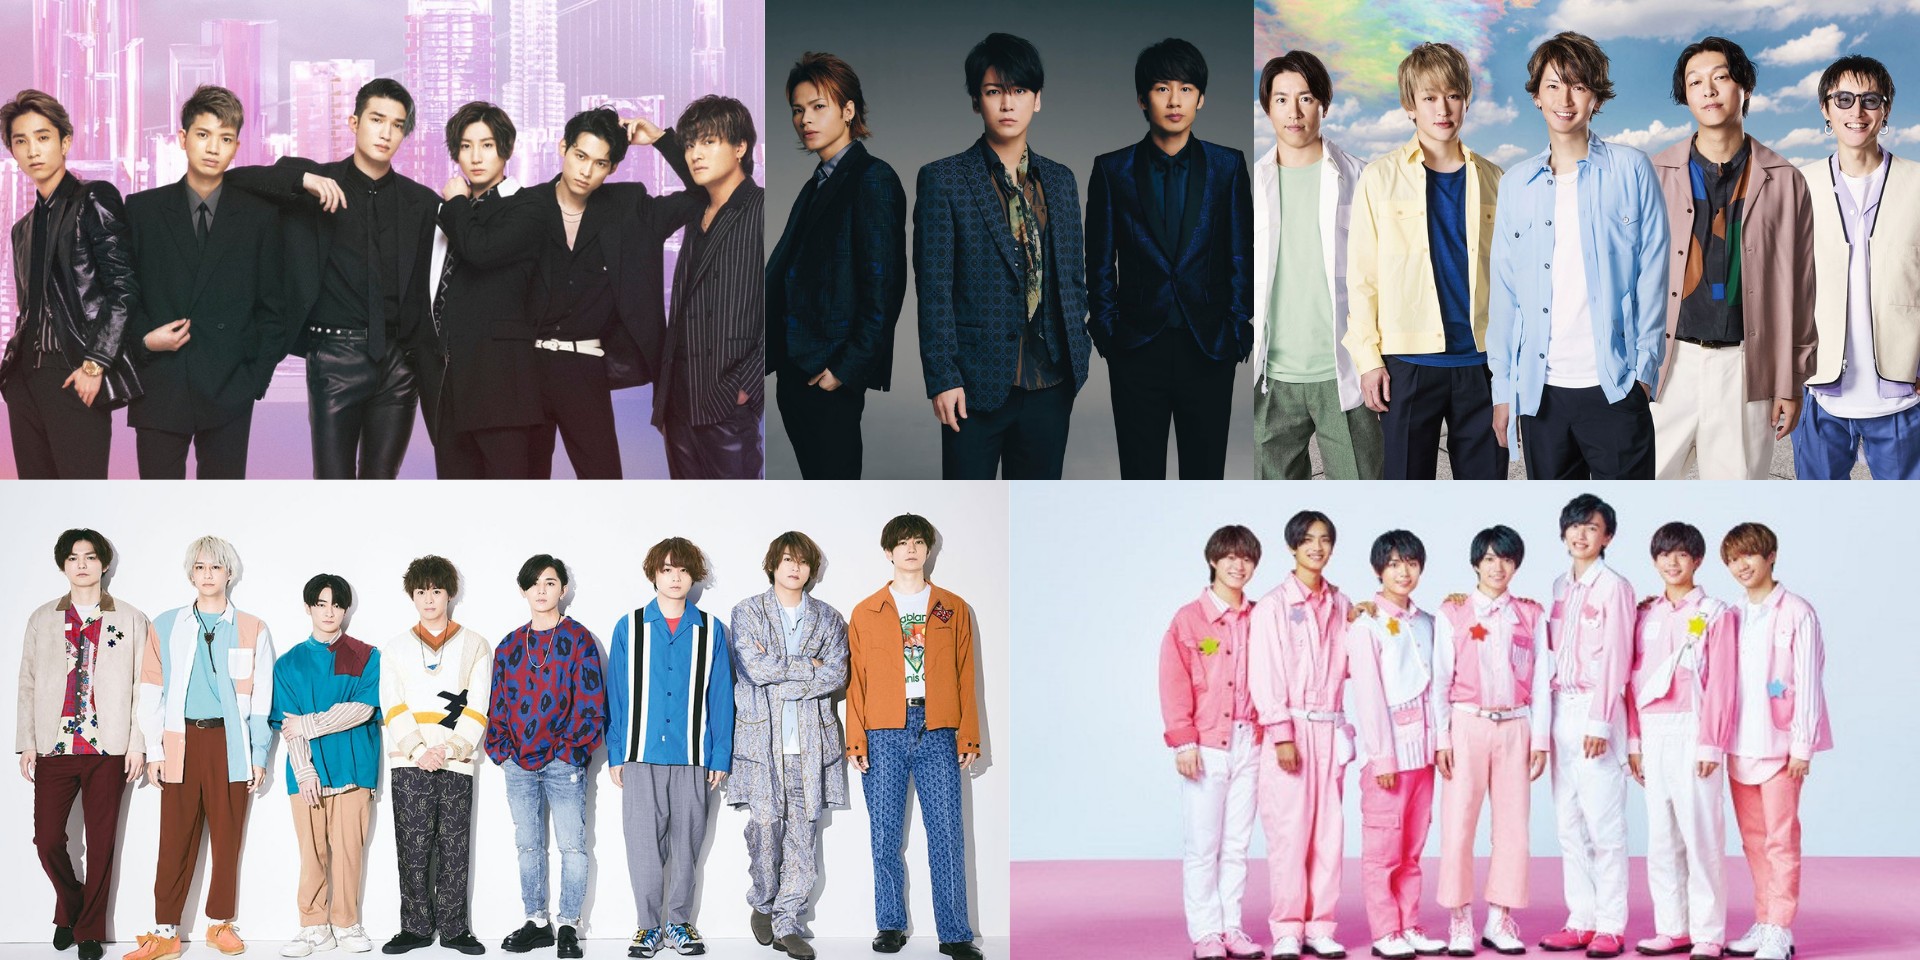 Here's how to watch 'Johnny's Festival'  featuring Naniwa Danshi, Kanjani Eight, KAT-TUN, Hey! Say! JUMP, SixTONES, and more